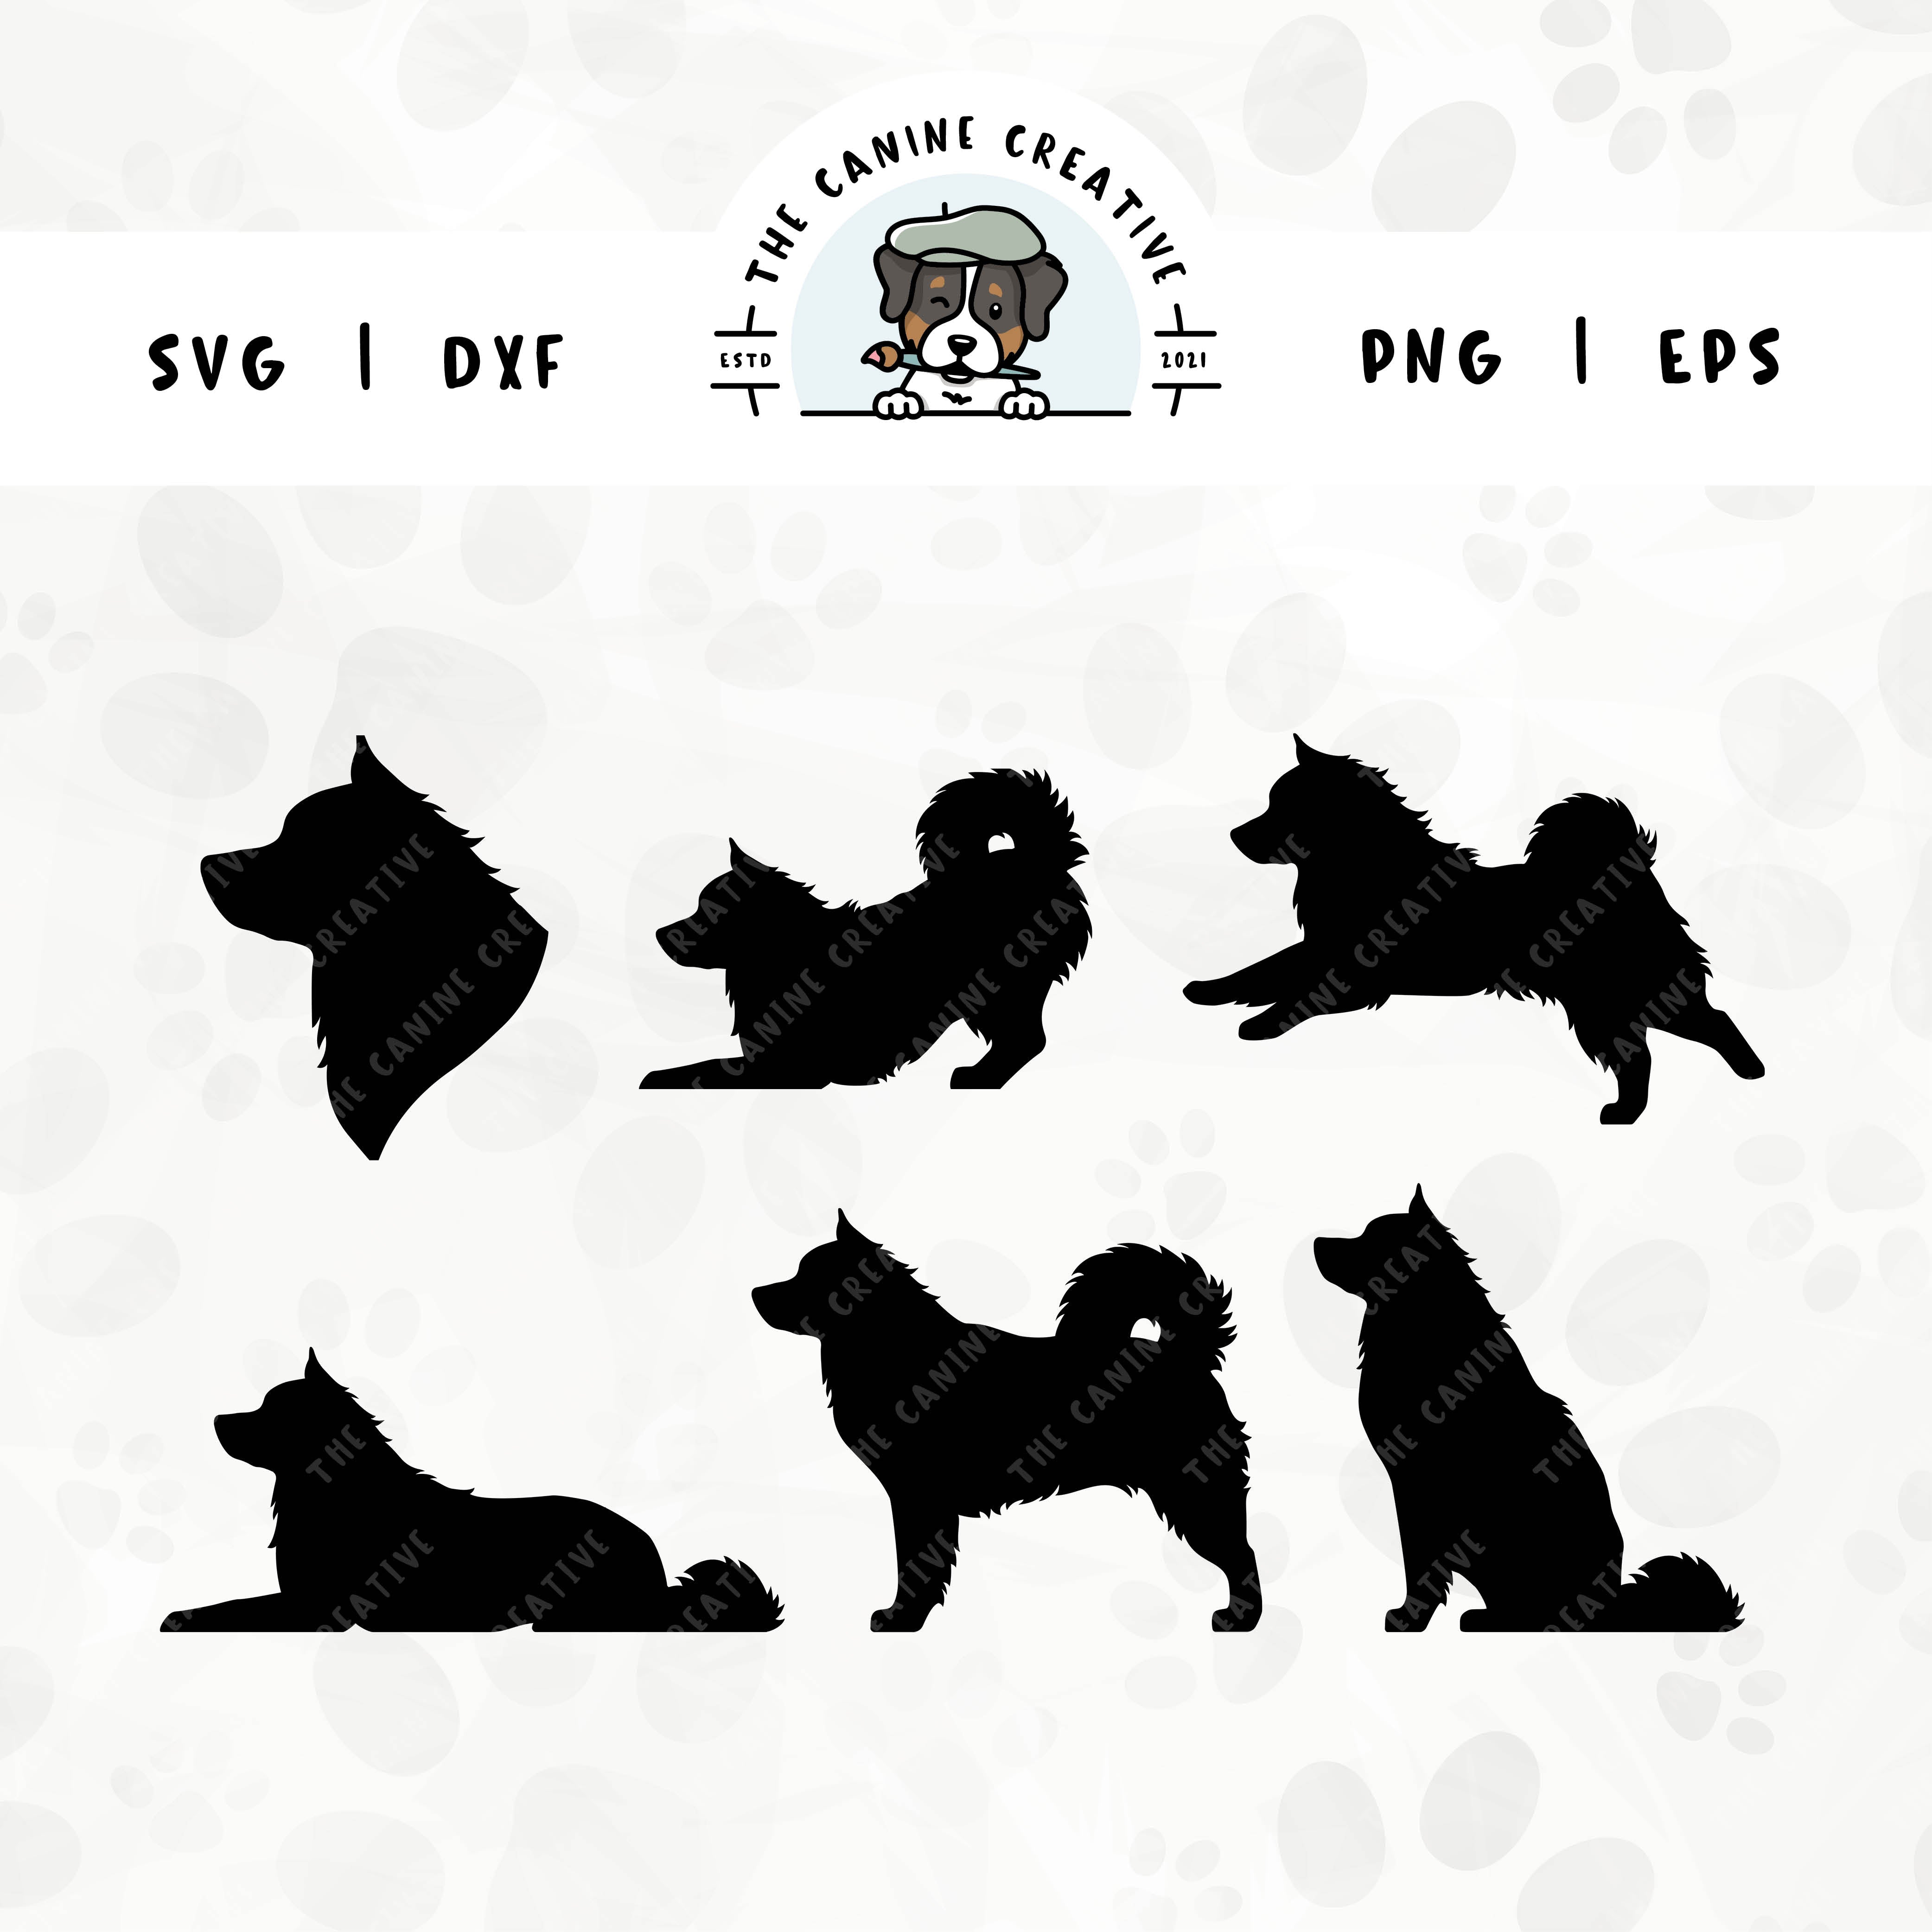 This 6-pack Alaskan Malamute silhouette bundle (set 1) features a dog's head in profile, along with various poses including running, laying down, playing, standing, and sitting. File formats include: SVG, DXF, PNG, and EPS.